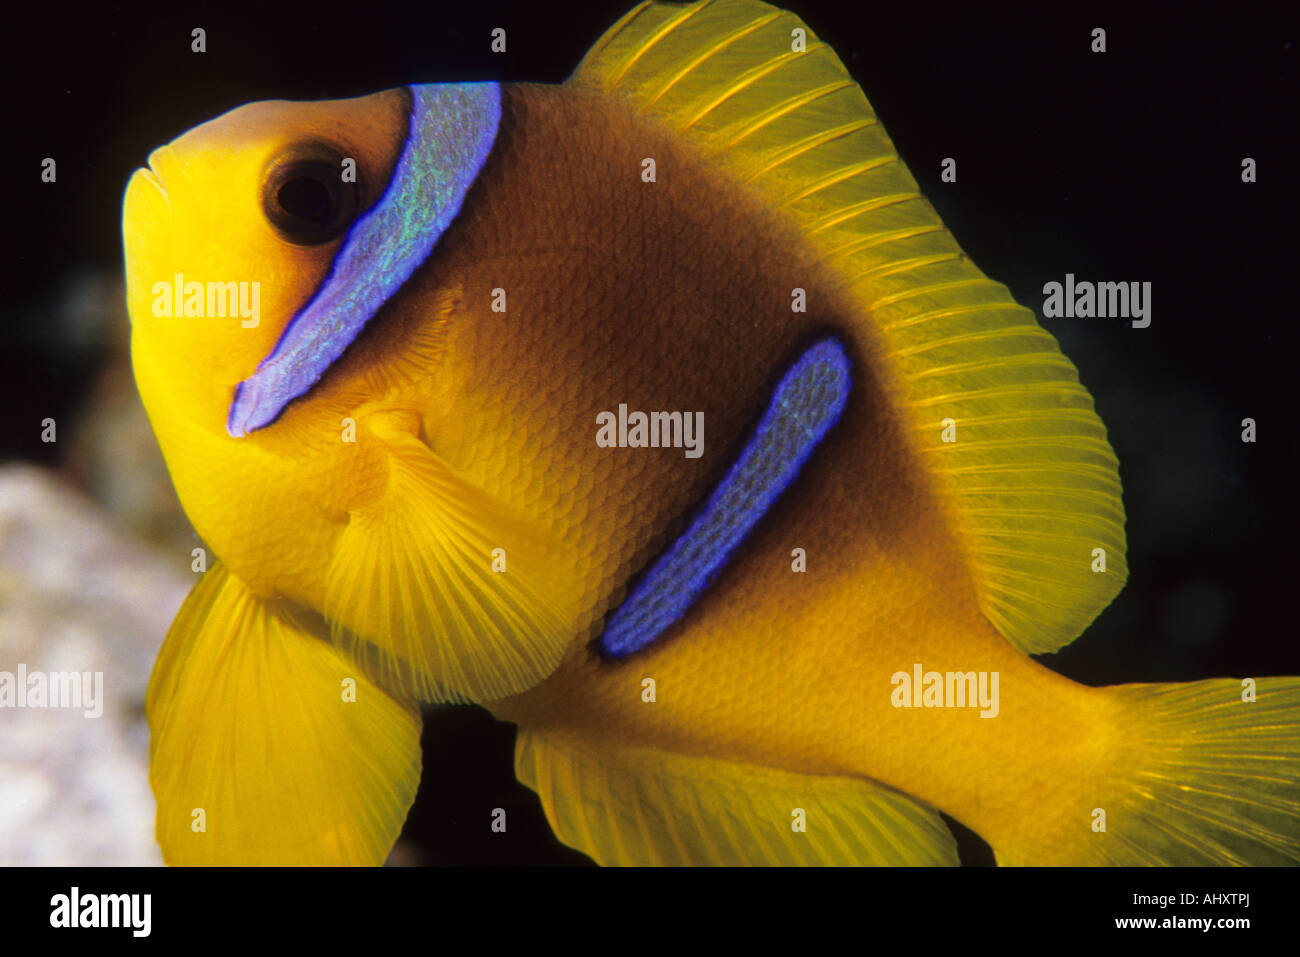 Red Sea Anemone Fish. Two - Banded Anemone Fish. Egyptian Red Sea Marine life. Anemone fish Stock Photo